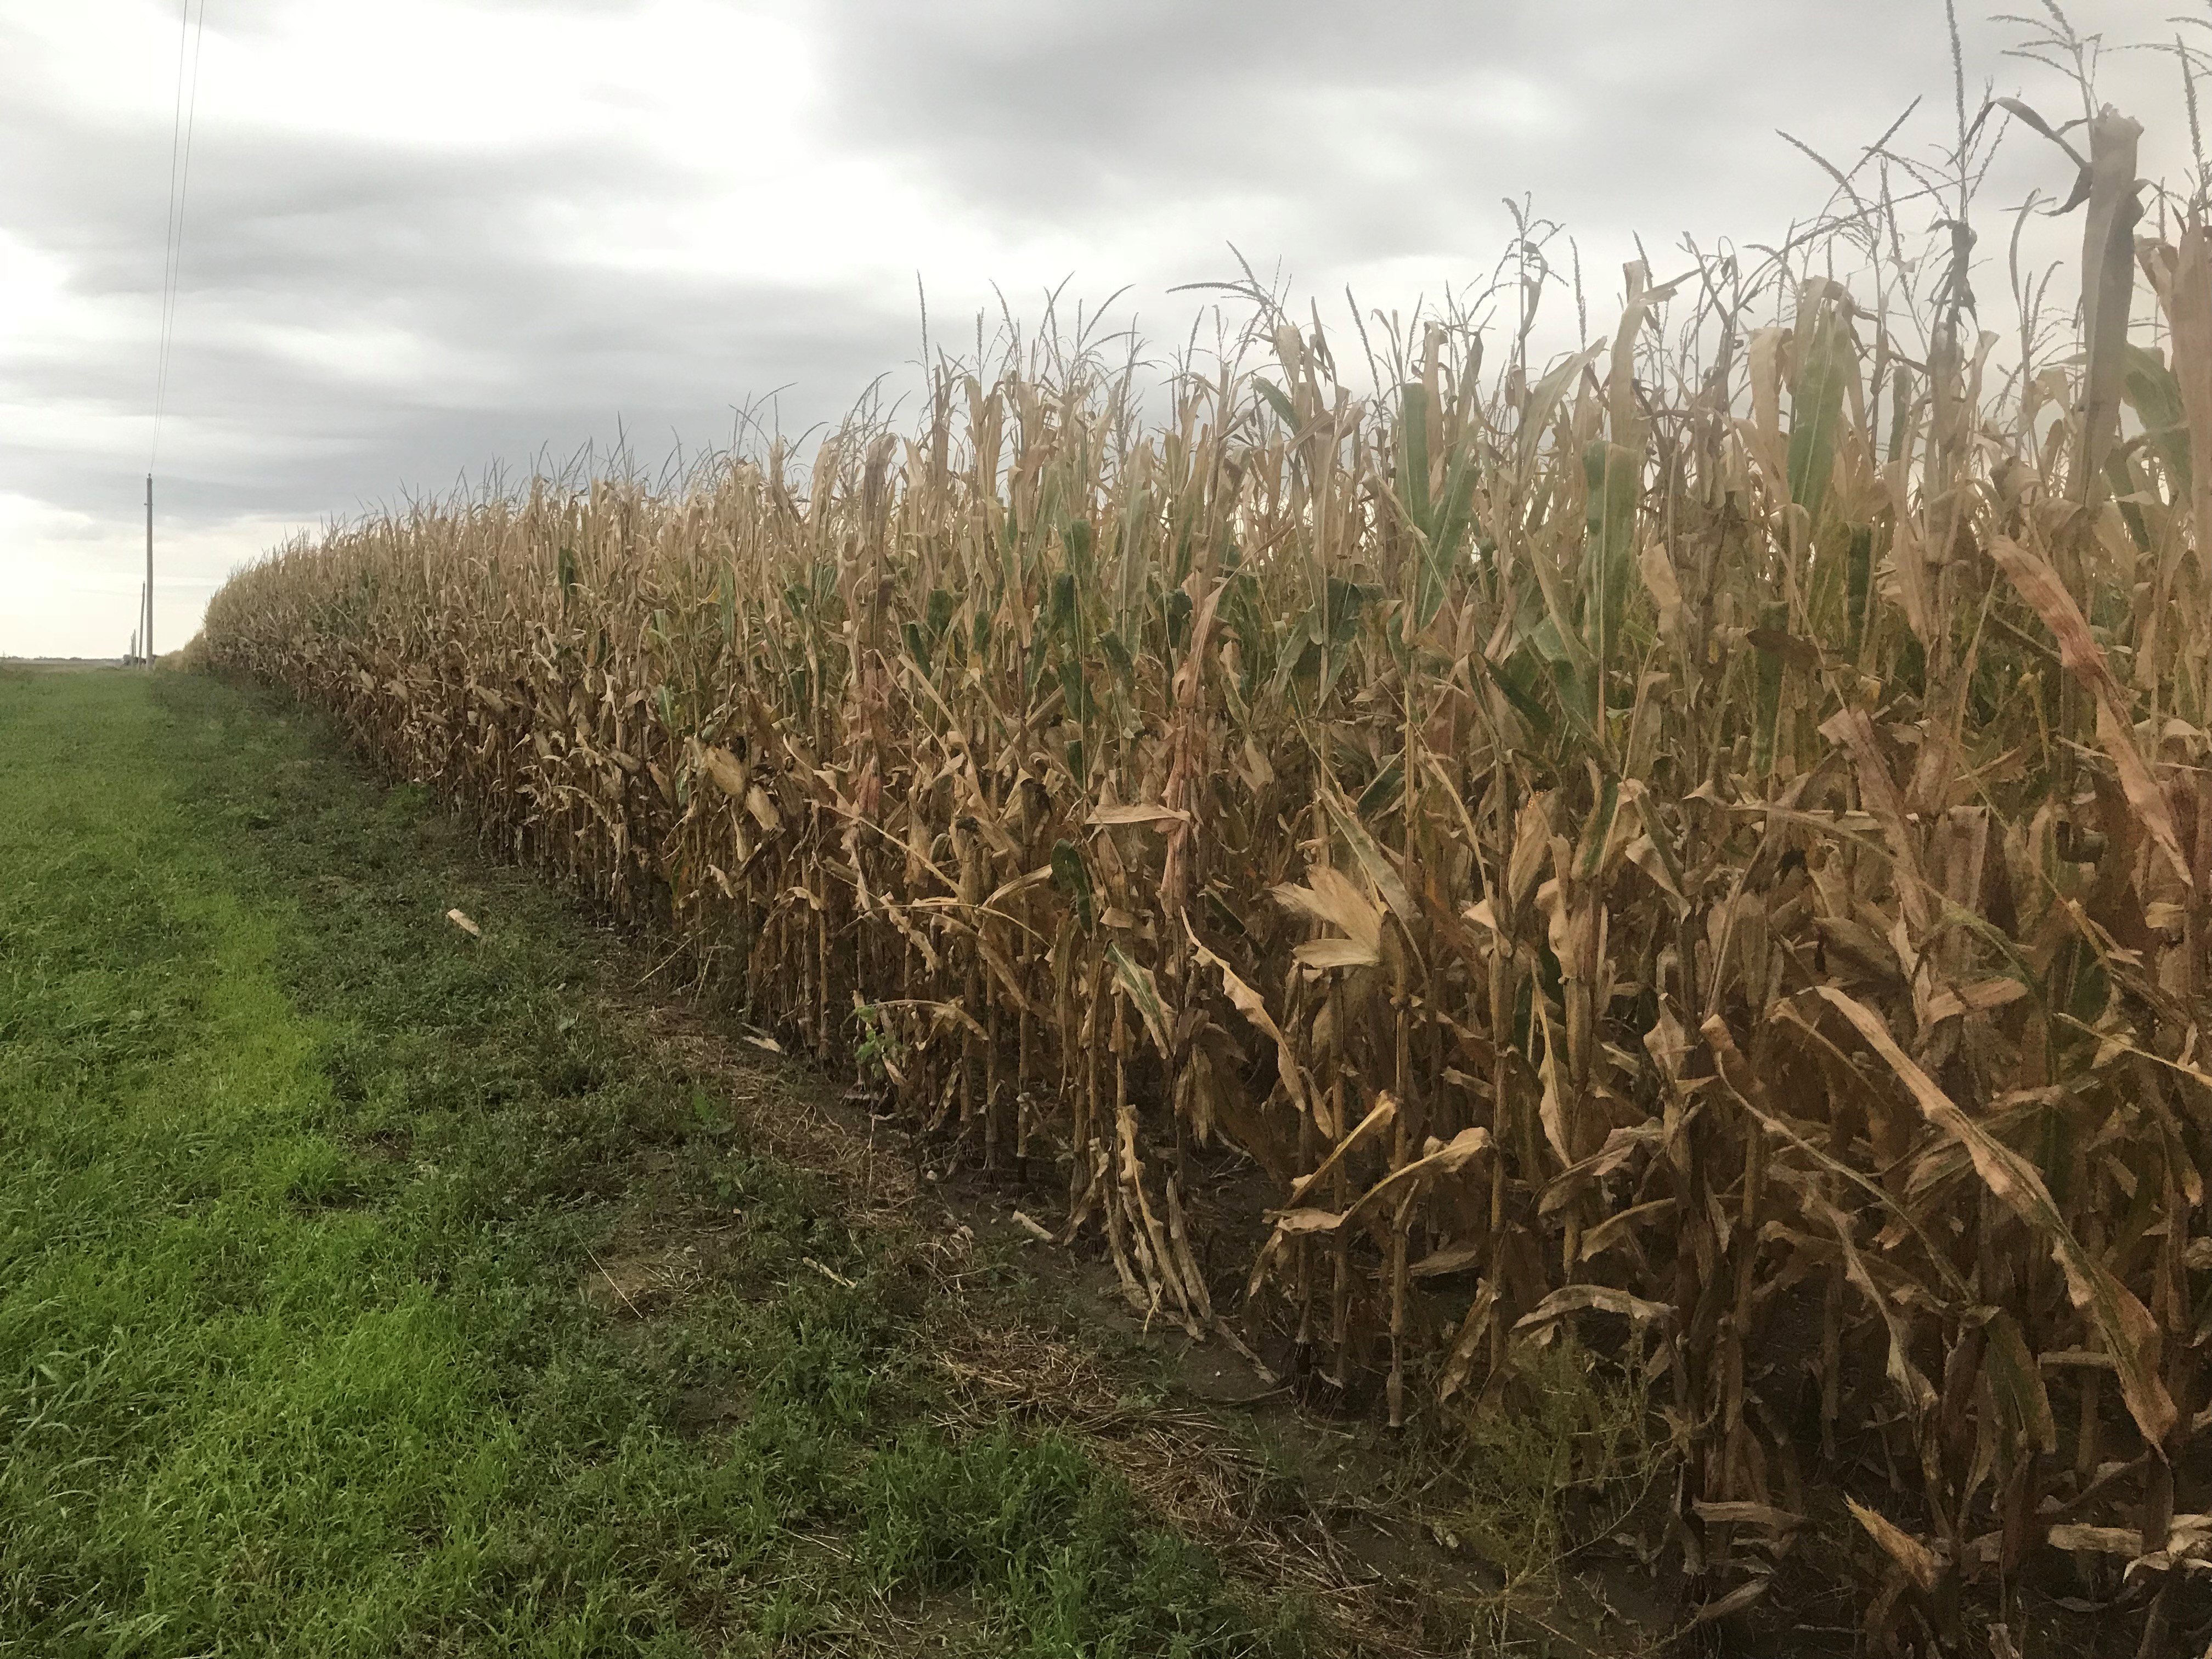 SDSU Extension’s Crop Hour 8-week webinar series will cover several areas of agronomic production, from soybeans and wheat to cover crops and climate. Photo Credit: Sara Bauder, SDSU Extension